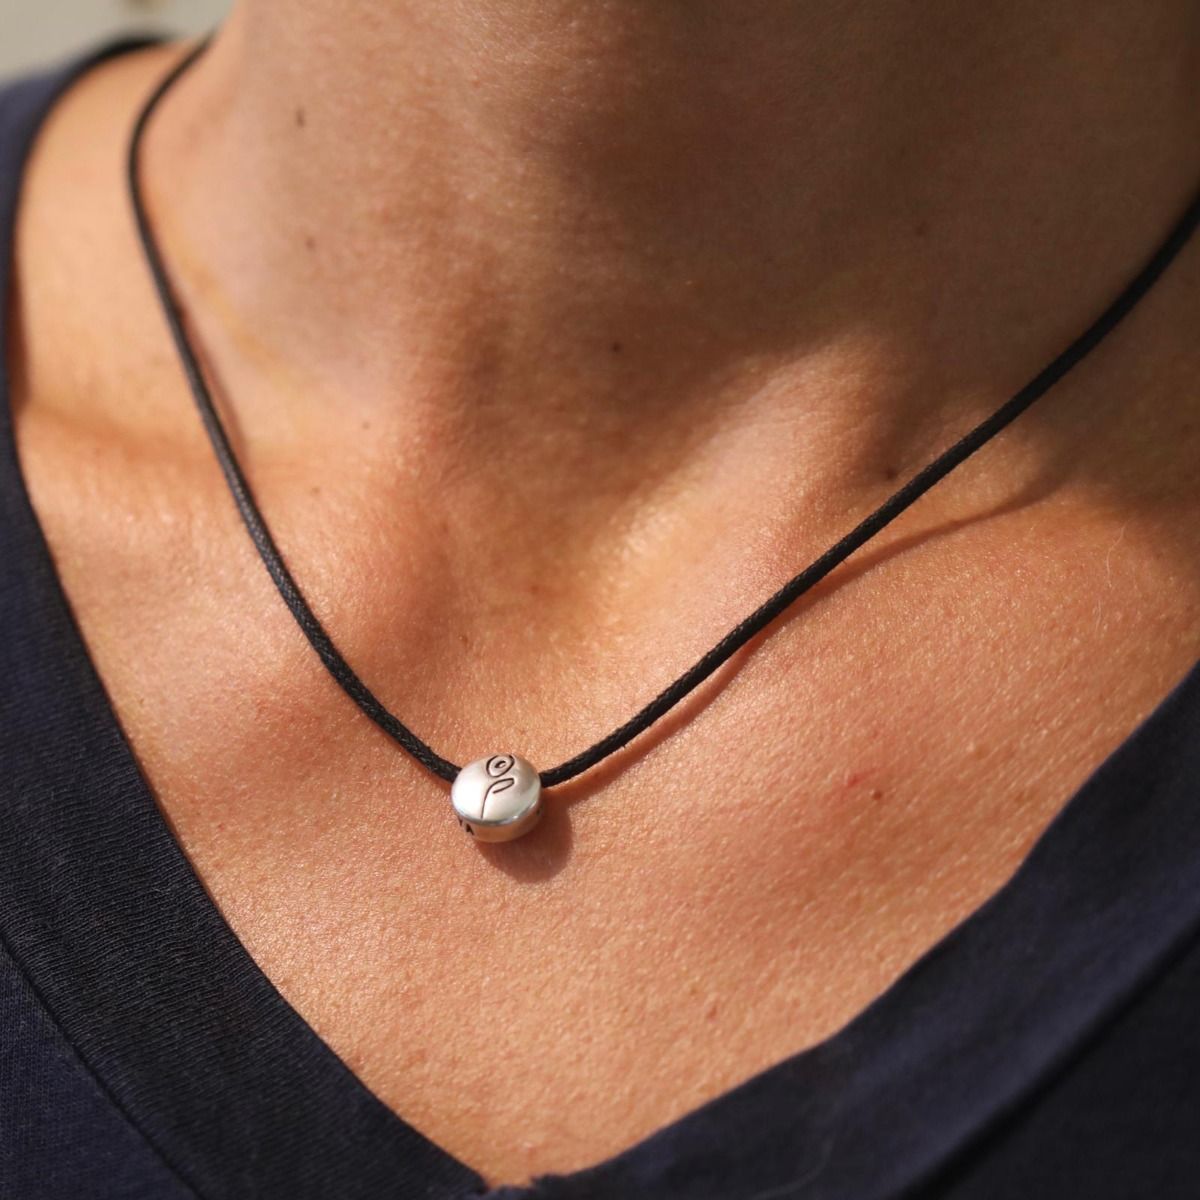 Buy Mini or XL Silver Puffed Heart String Necklace Black Cord Long Wrap Tie  Choker Stainless Steel 3D Puffy Pendant Handmade Unisex Jewelry Online in  India - Etsy